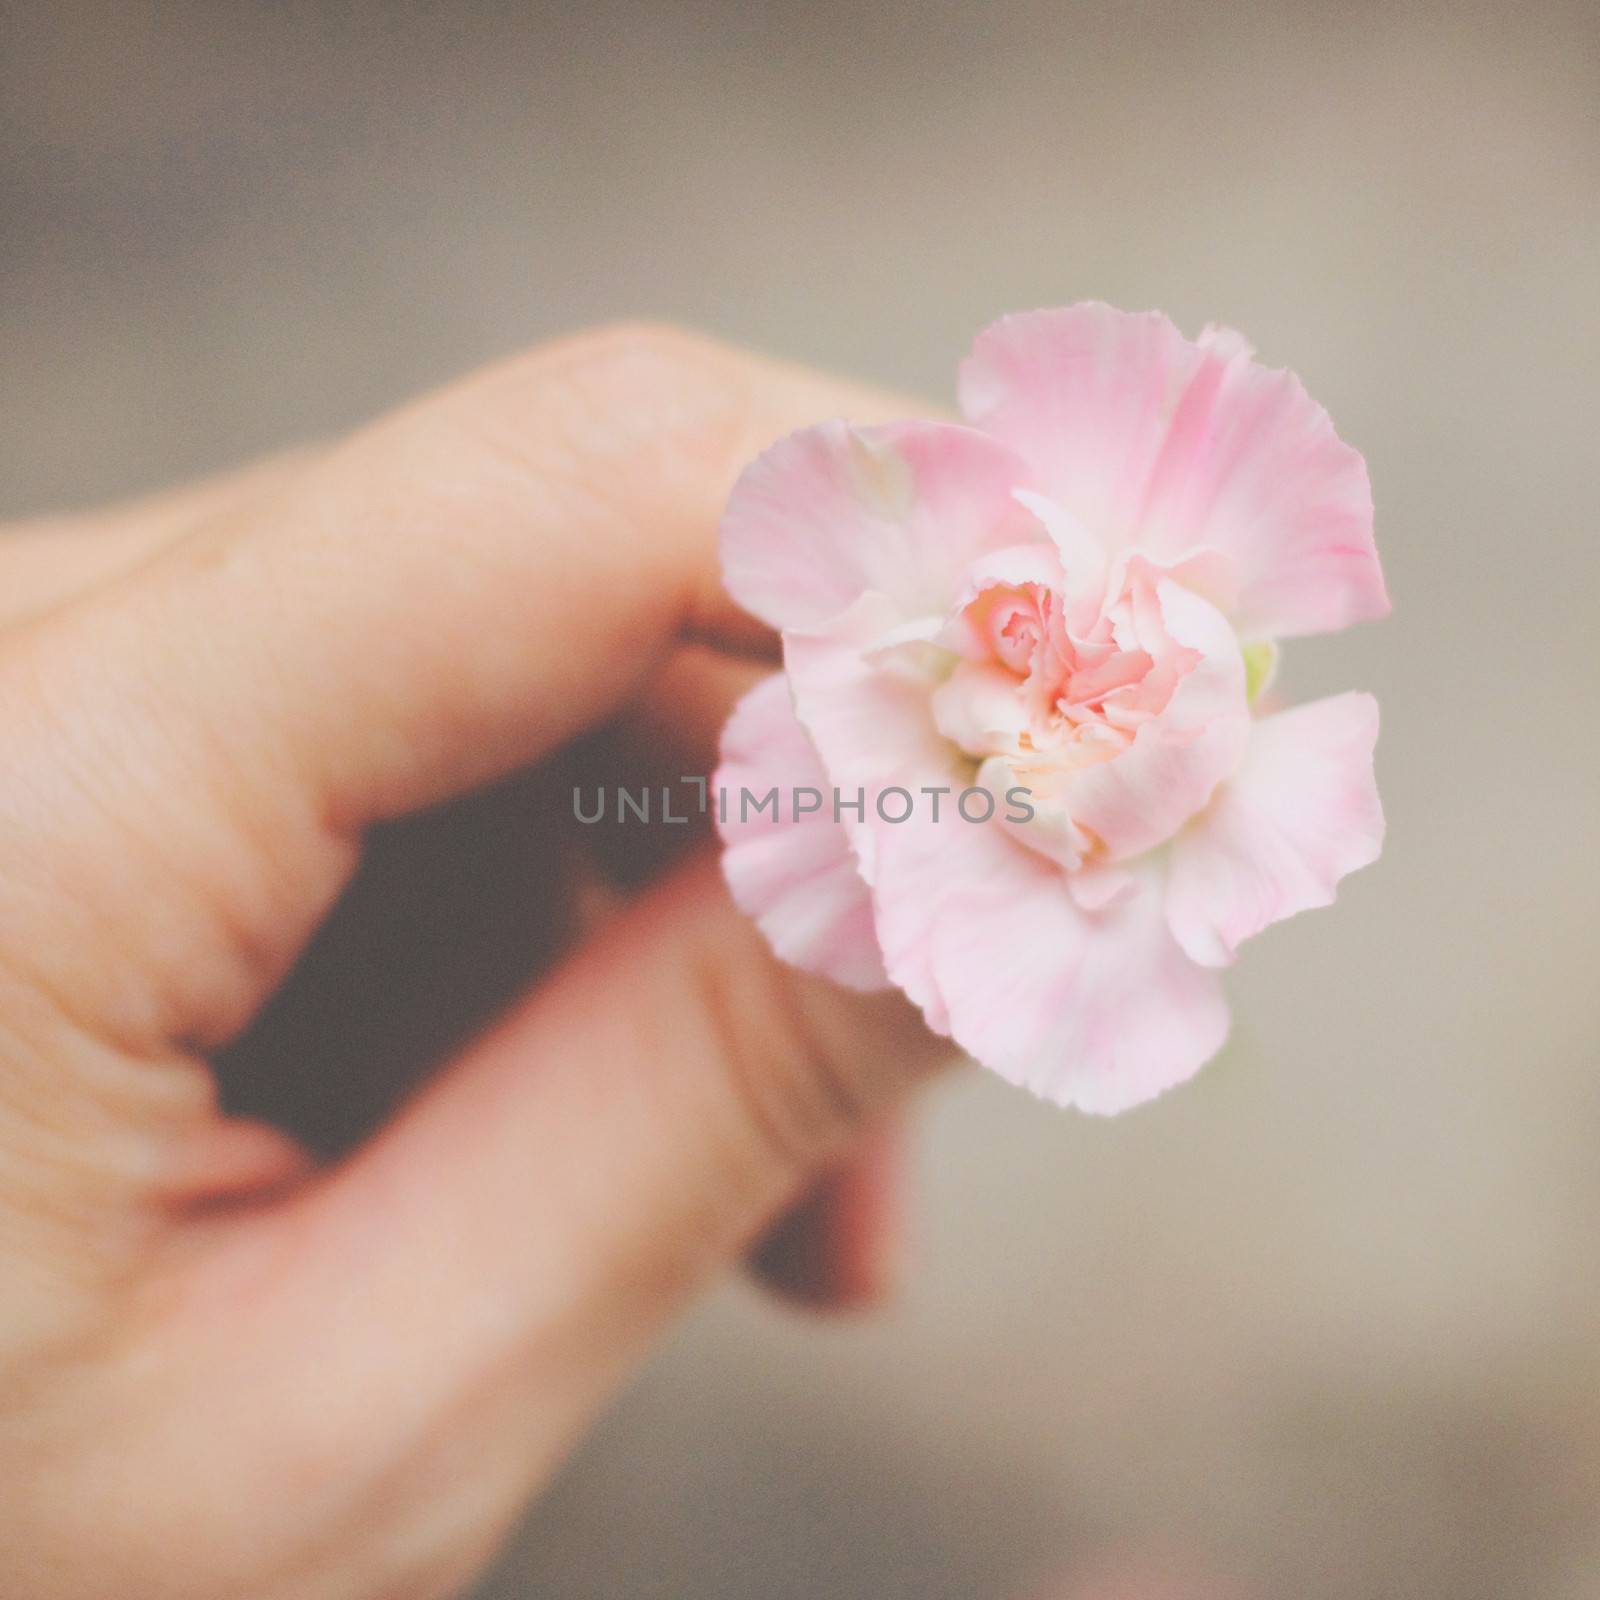 Hand holding pink flower with retro filter effect